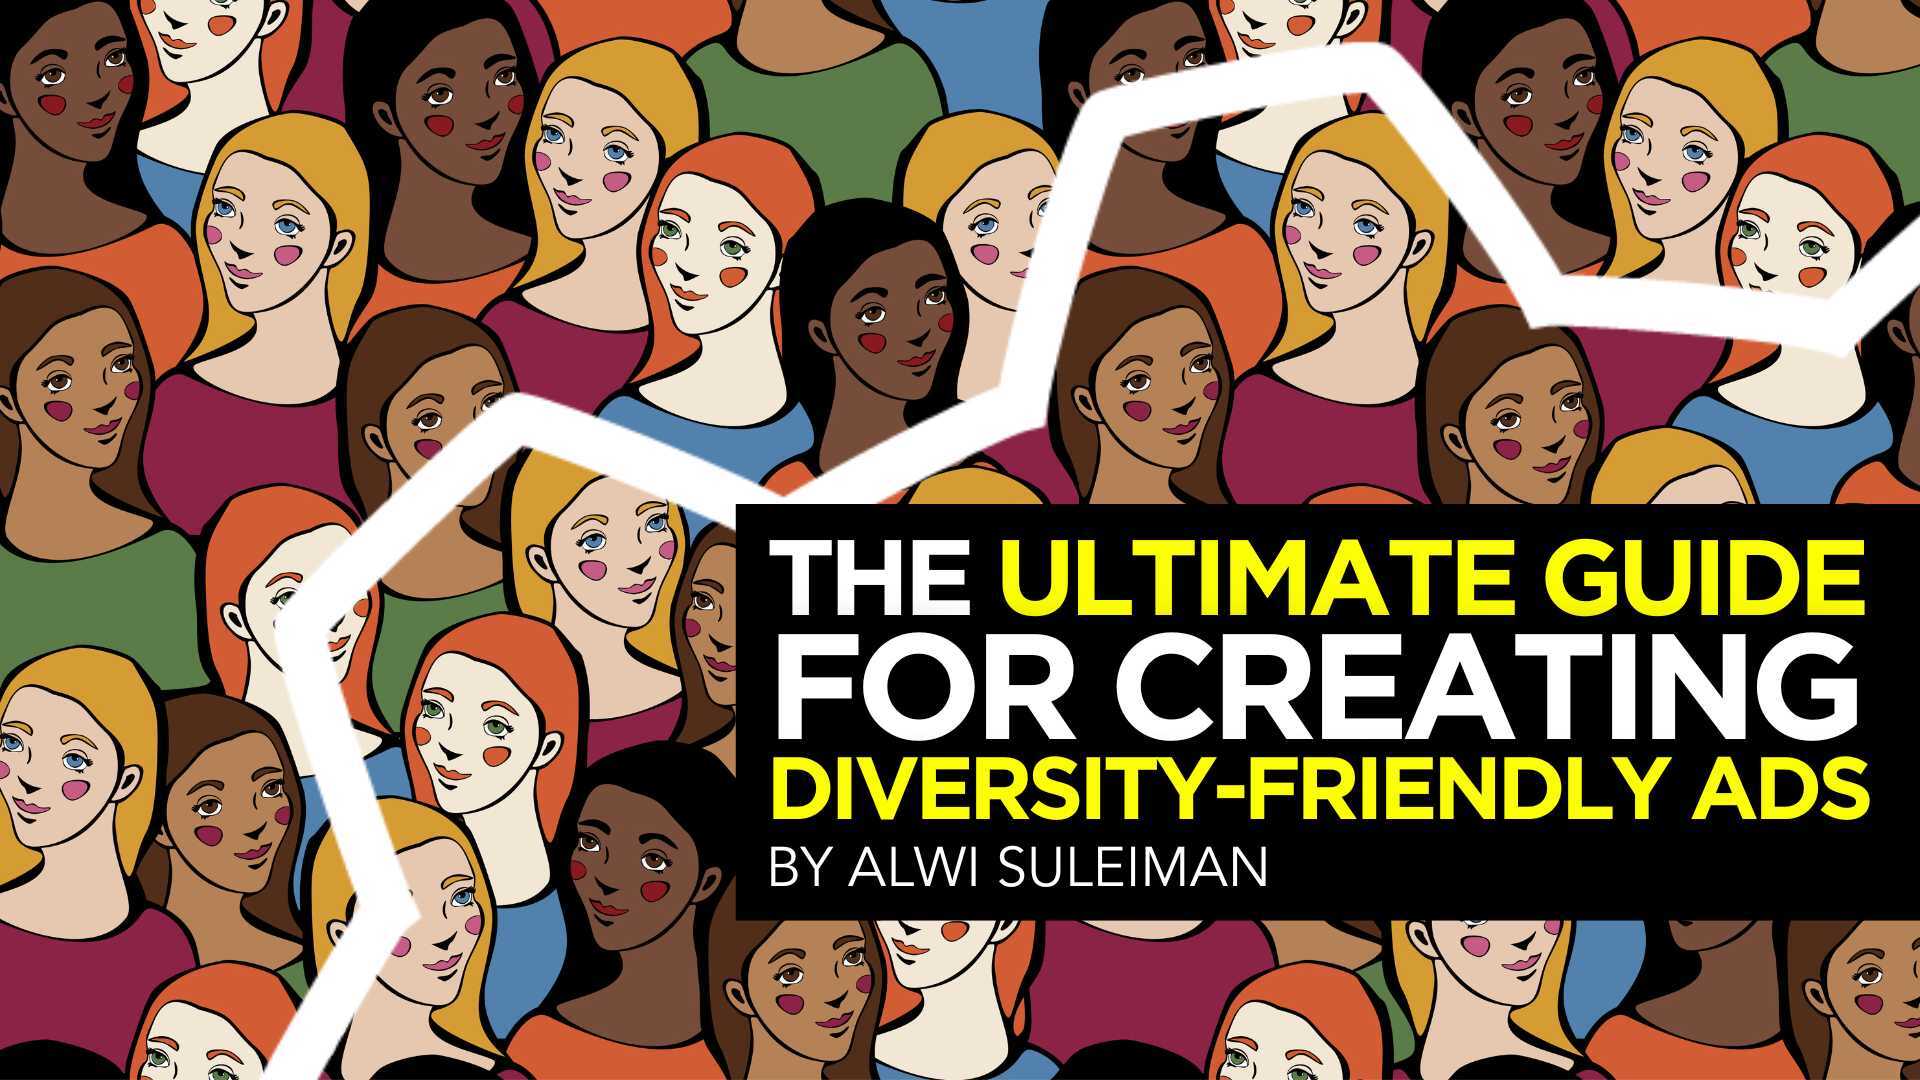 The Ultimate Guide for Creating Diversity-Friendly Ads